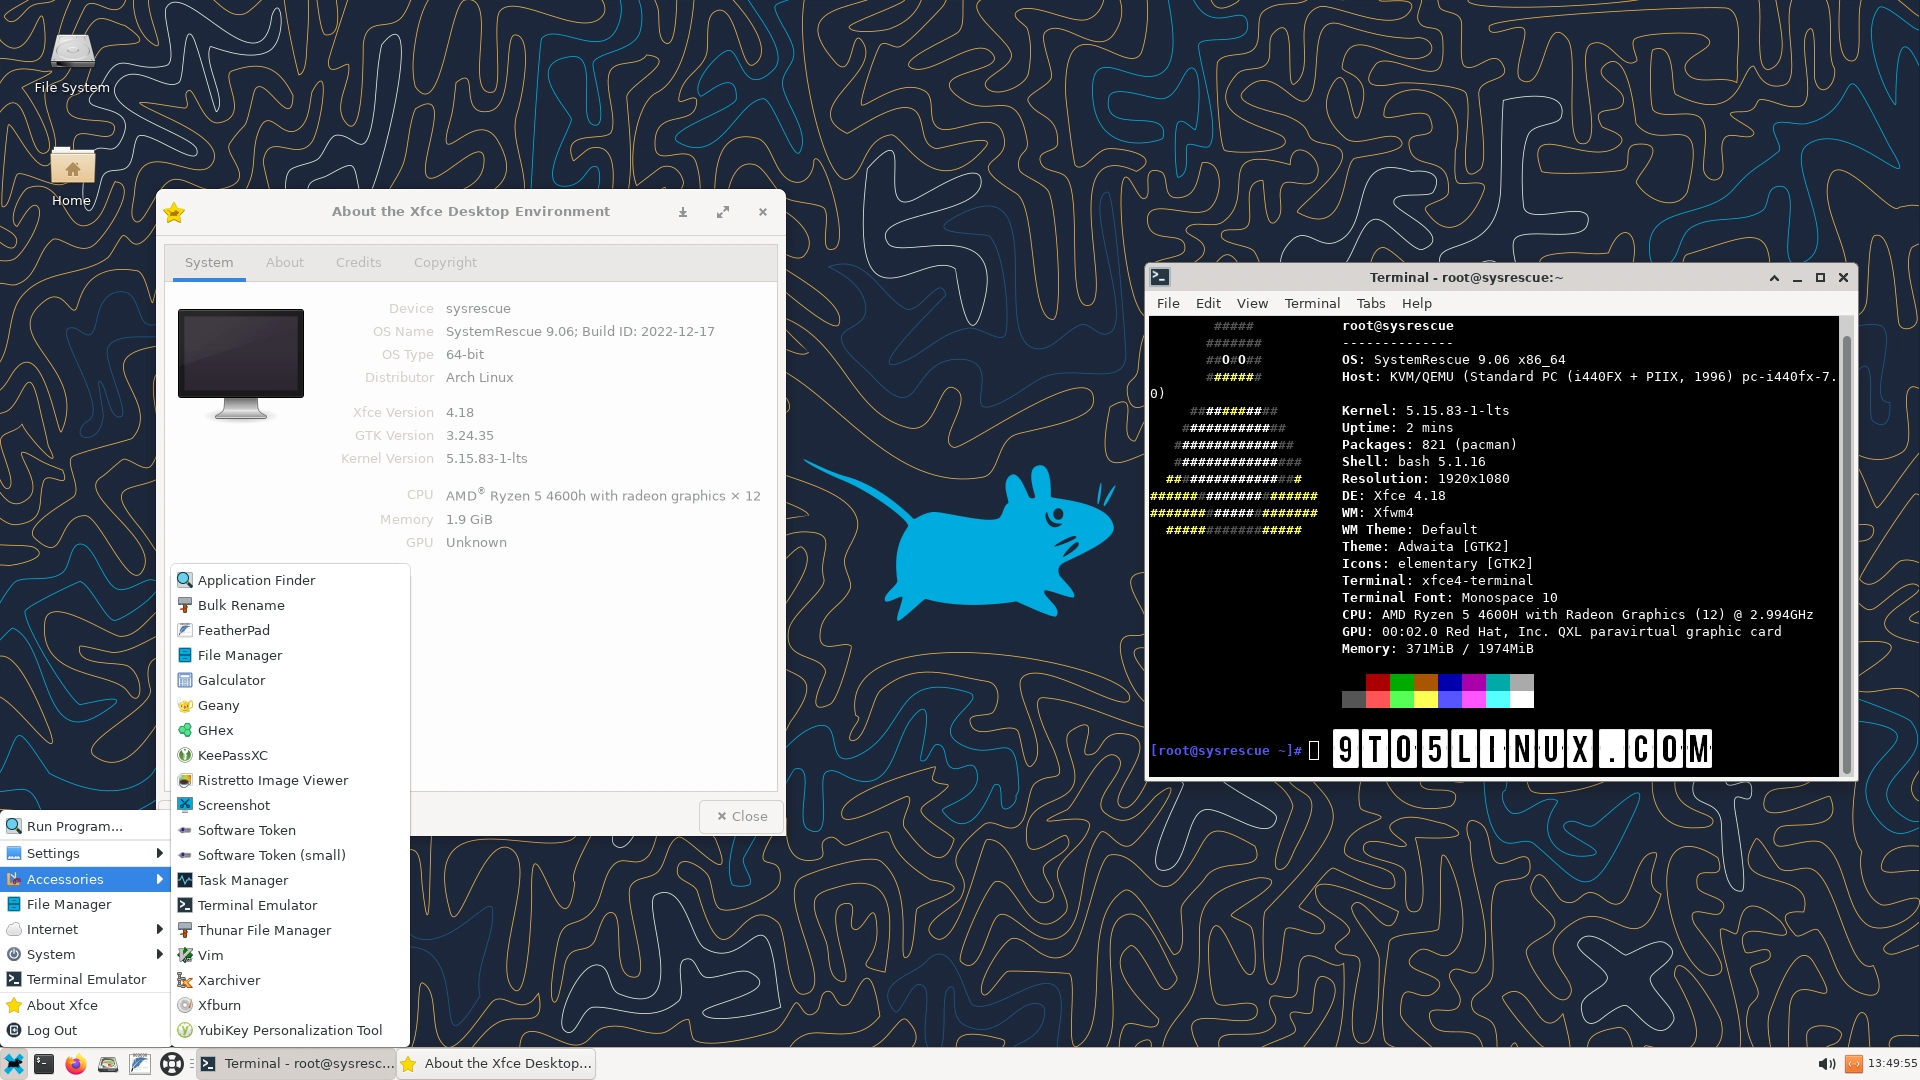 Arch Linux-Based SystemRescue 9.06 Toolkit Adds Xfce 4.18 and New Bootable USB Creator